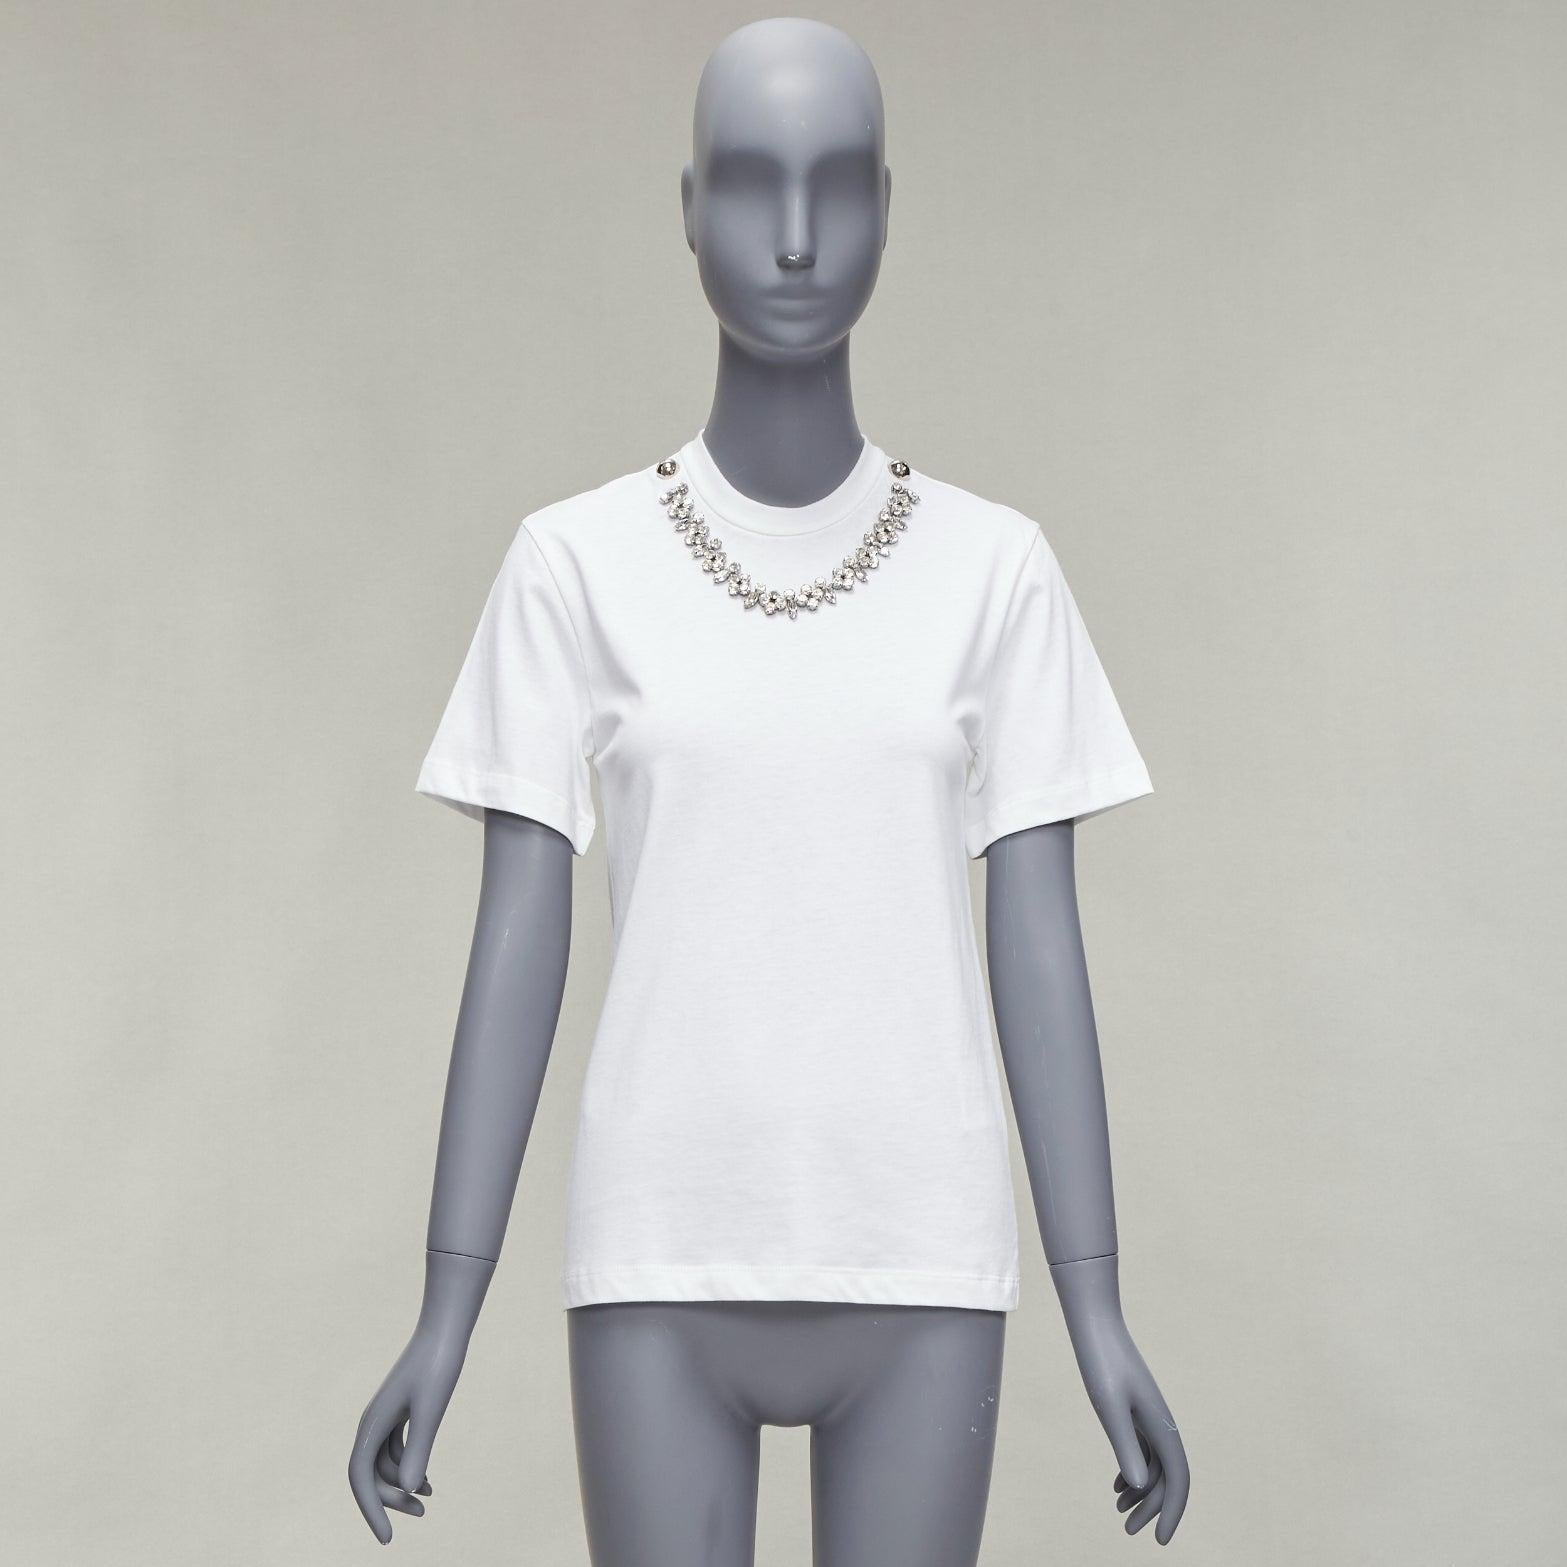 CHRISTOPHER KANE crystal rhinestone dome stud necklace white cotton tshirt XS For Sale 5